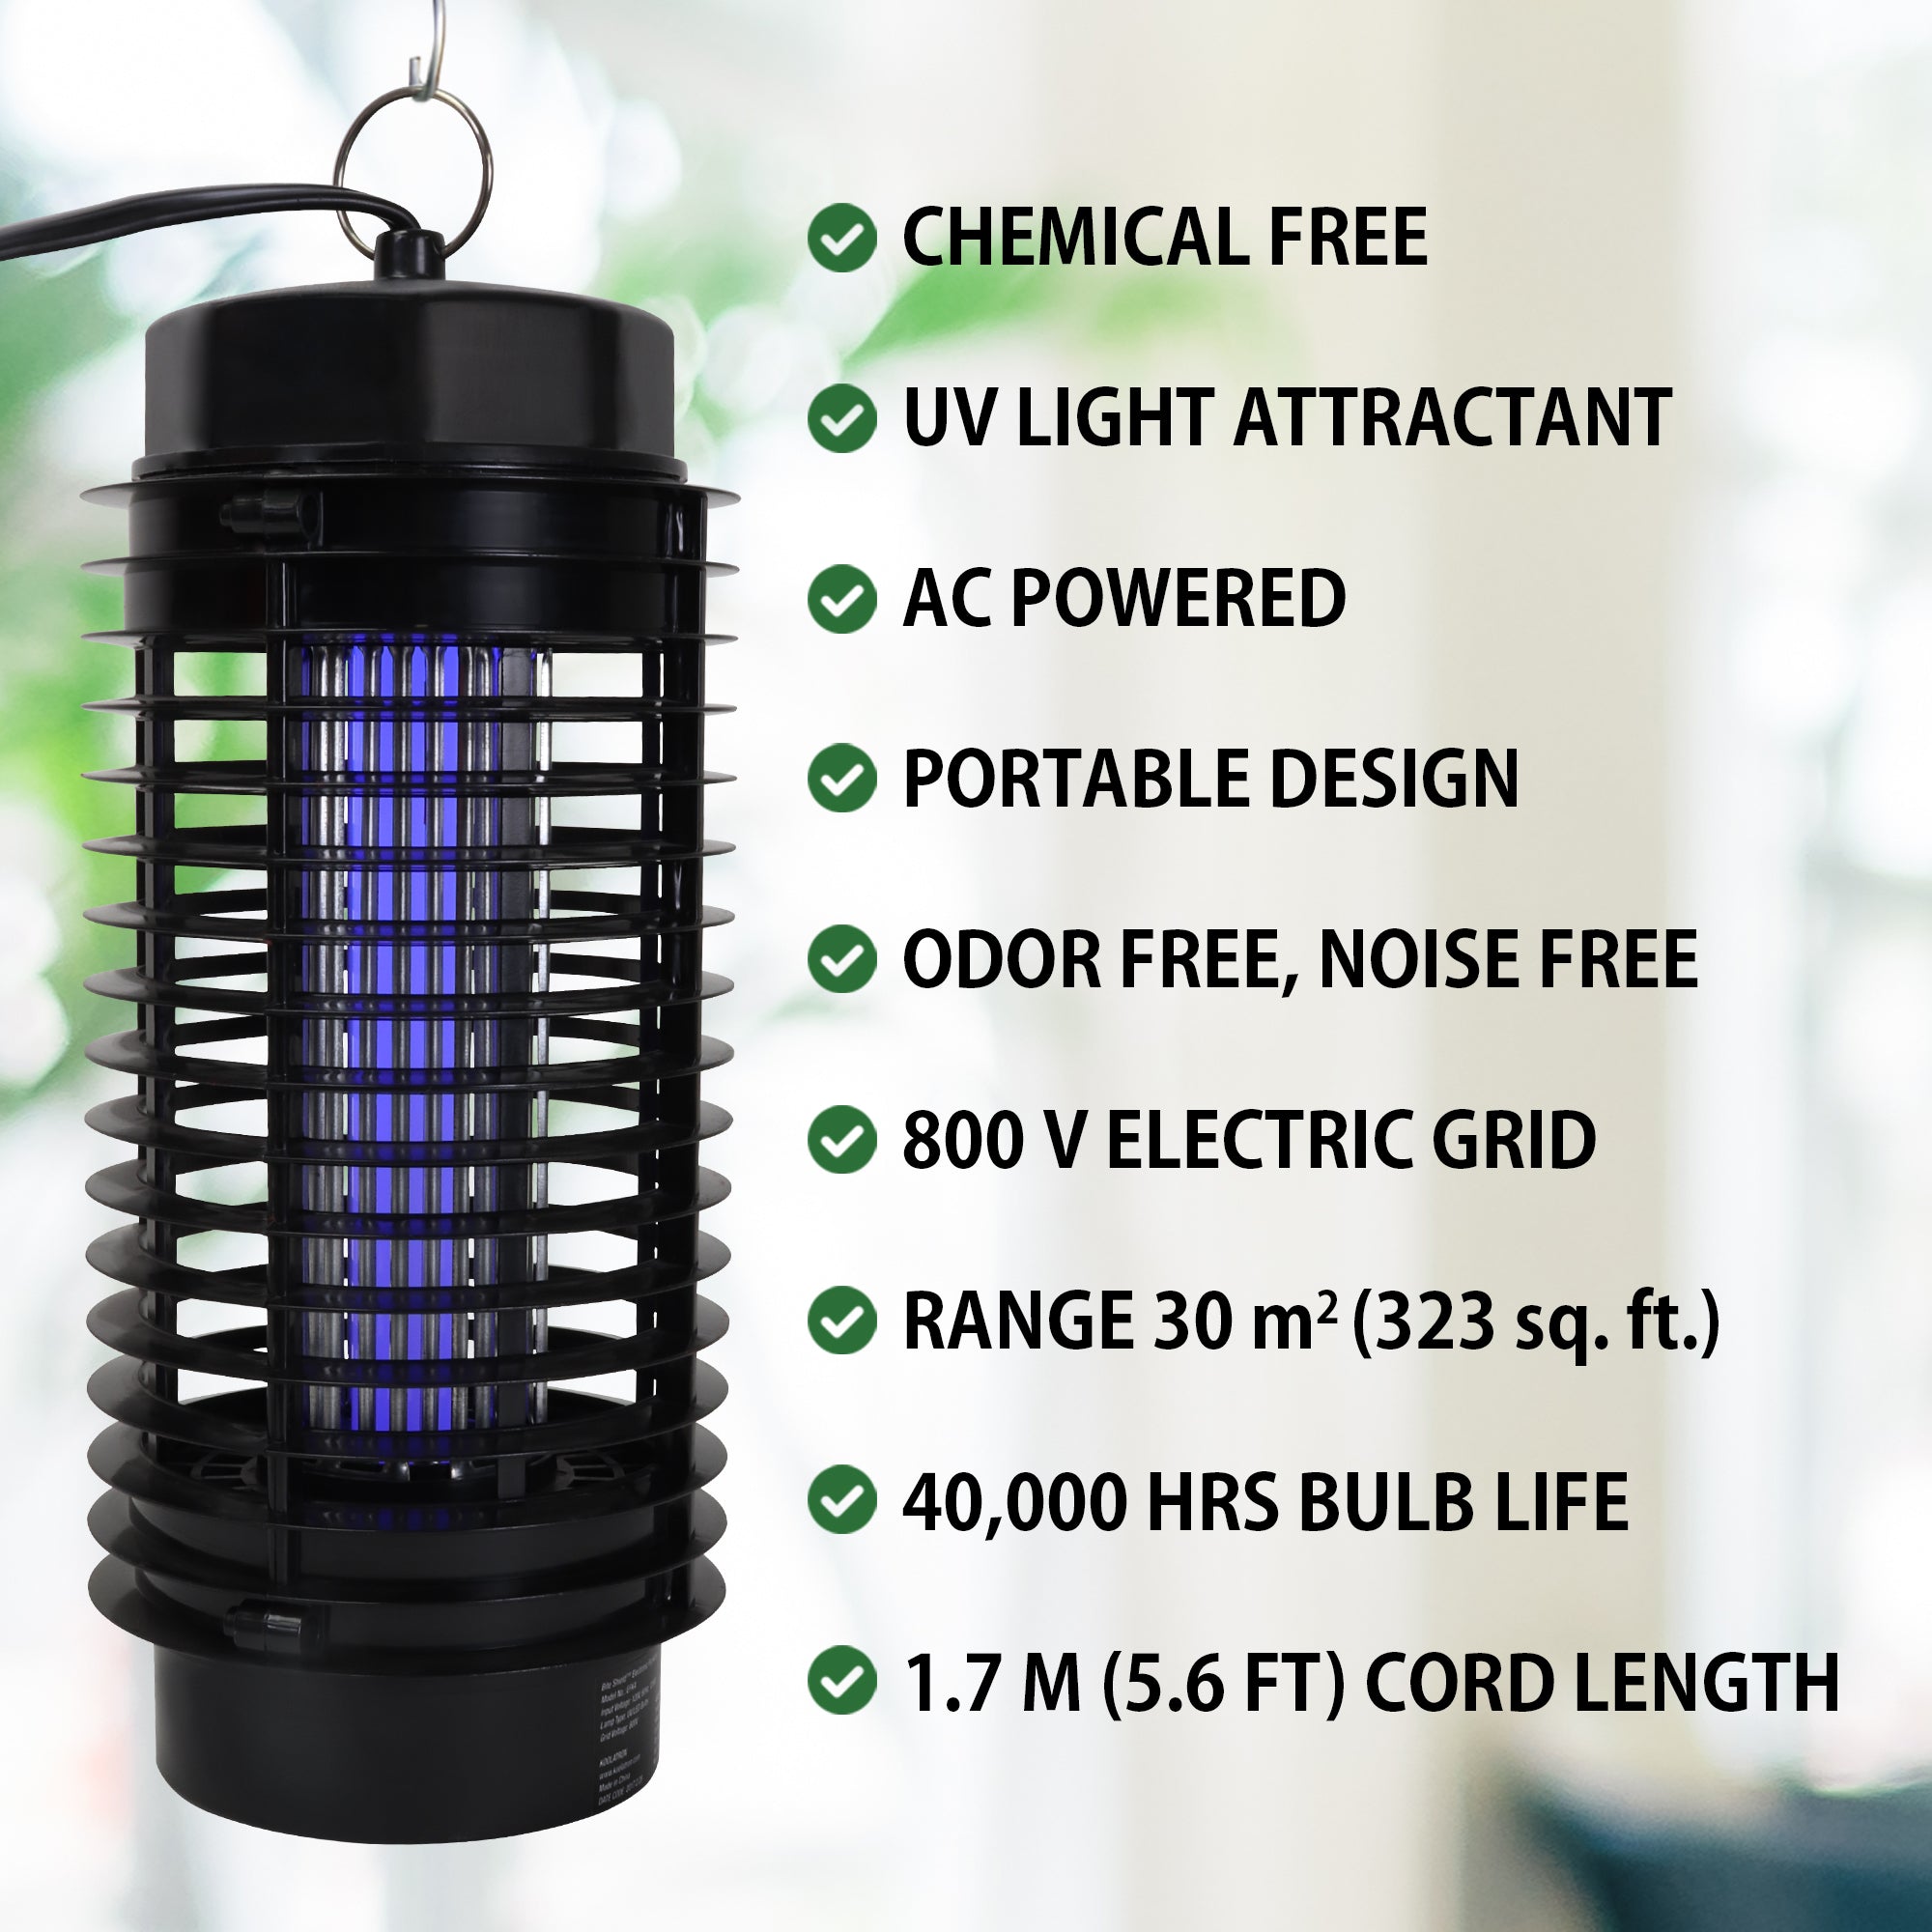 Product shot of the Bite Shield electronic flying insect zapper on a blurred white and green background with a list of bullet points to the right: Chemical free; UV light attractant; AC powered; portable design; odor free, noise free; 800V electric grid; range 30 m^2 (323 sq. ft.); 40,000 hrs bulb life; 1.7 m (5.6 ft) cord length